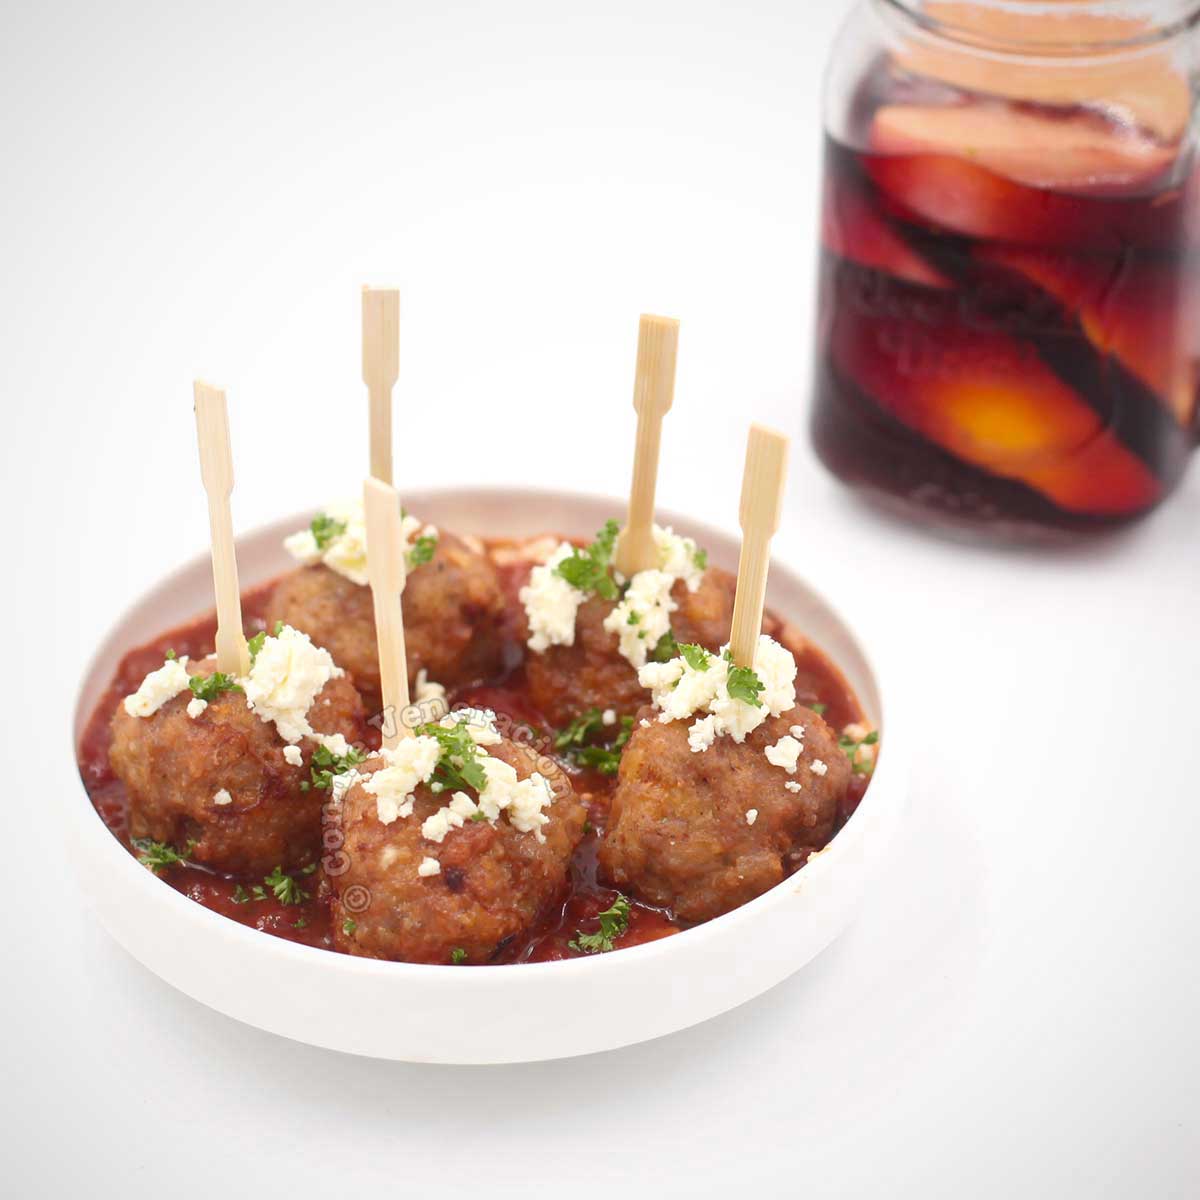 Spanish-style meatballs and sangria